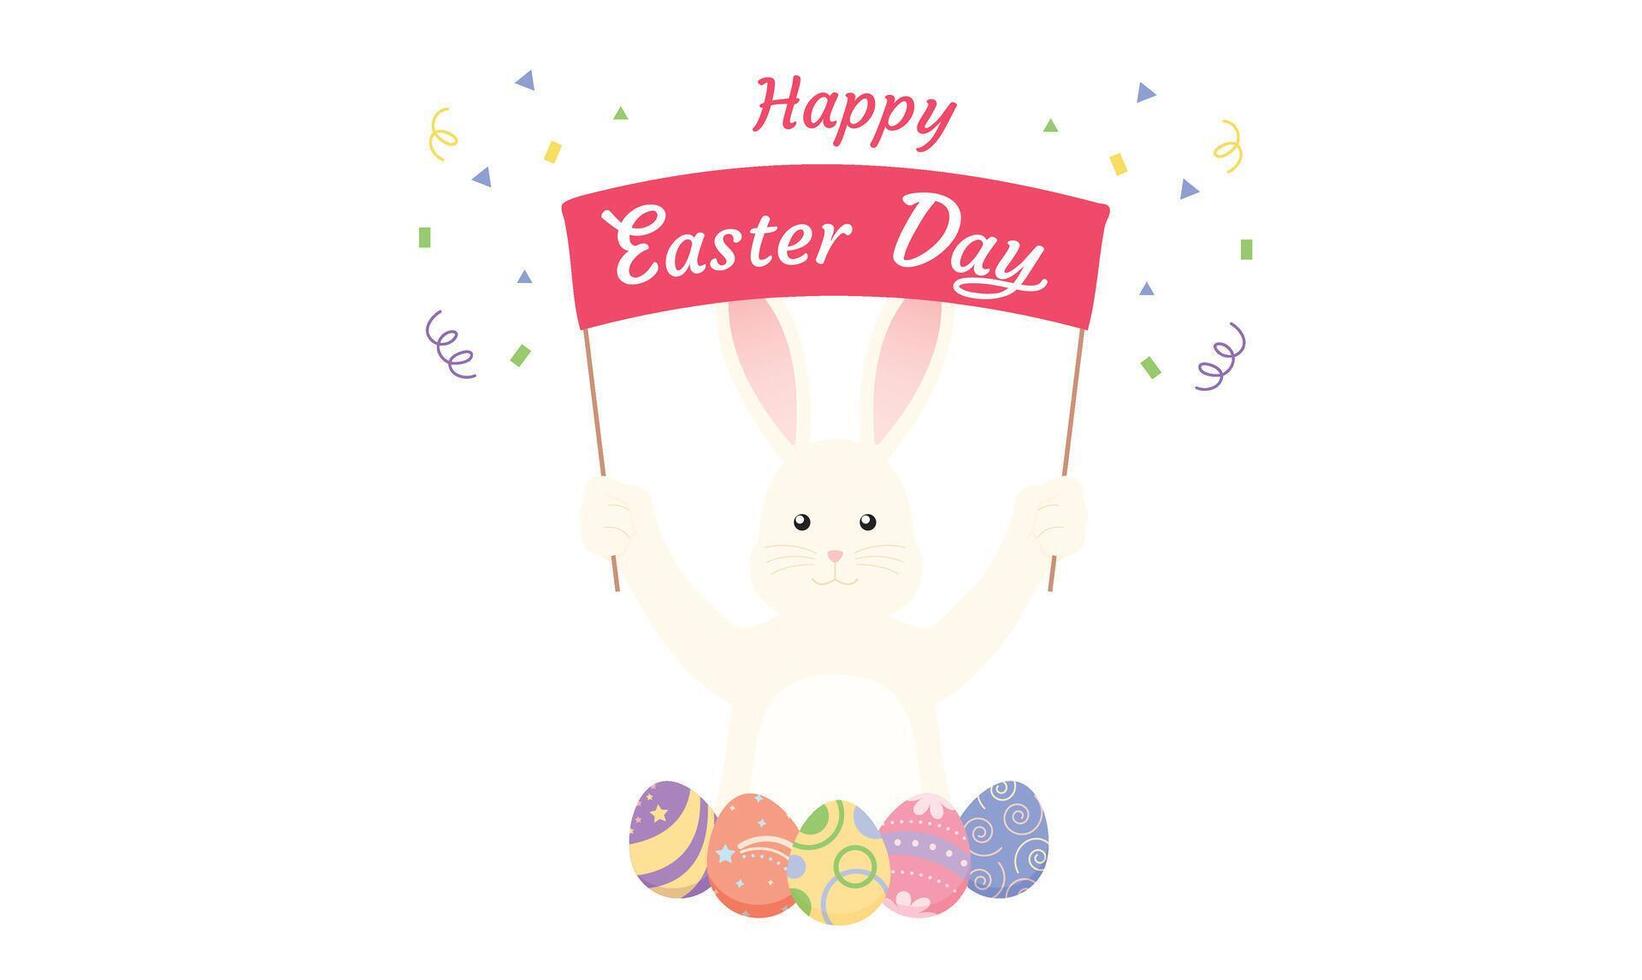 Character cartoon icon object happy easter egg day egg rabbit bunny animal pet spring time cute holiday season vector illustration happy easter egg march april month template greeting easter day funny